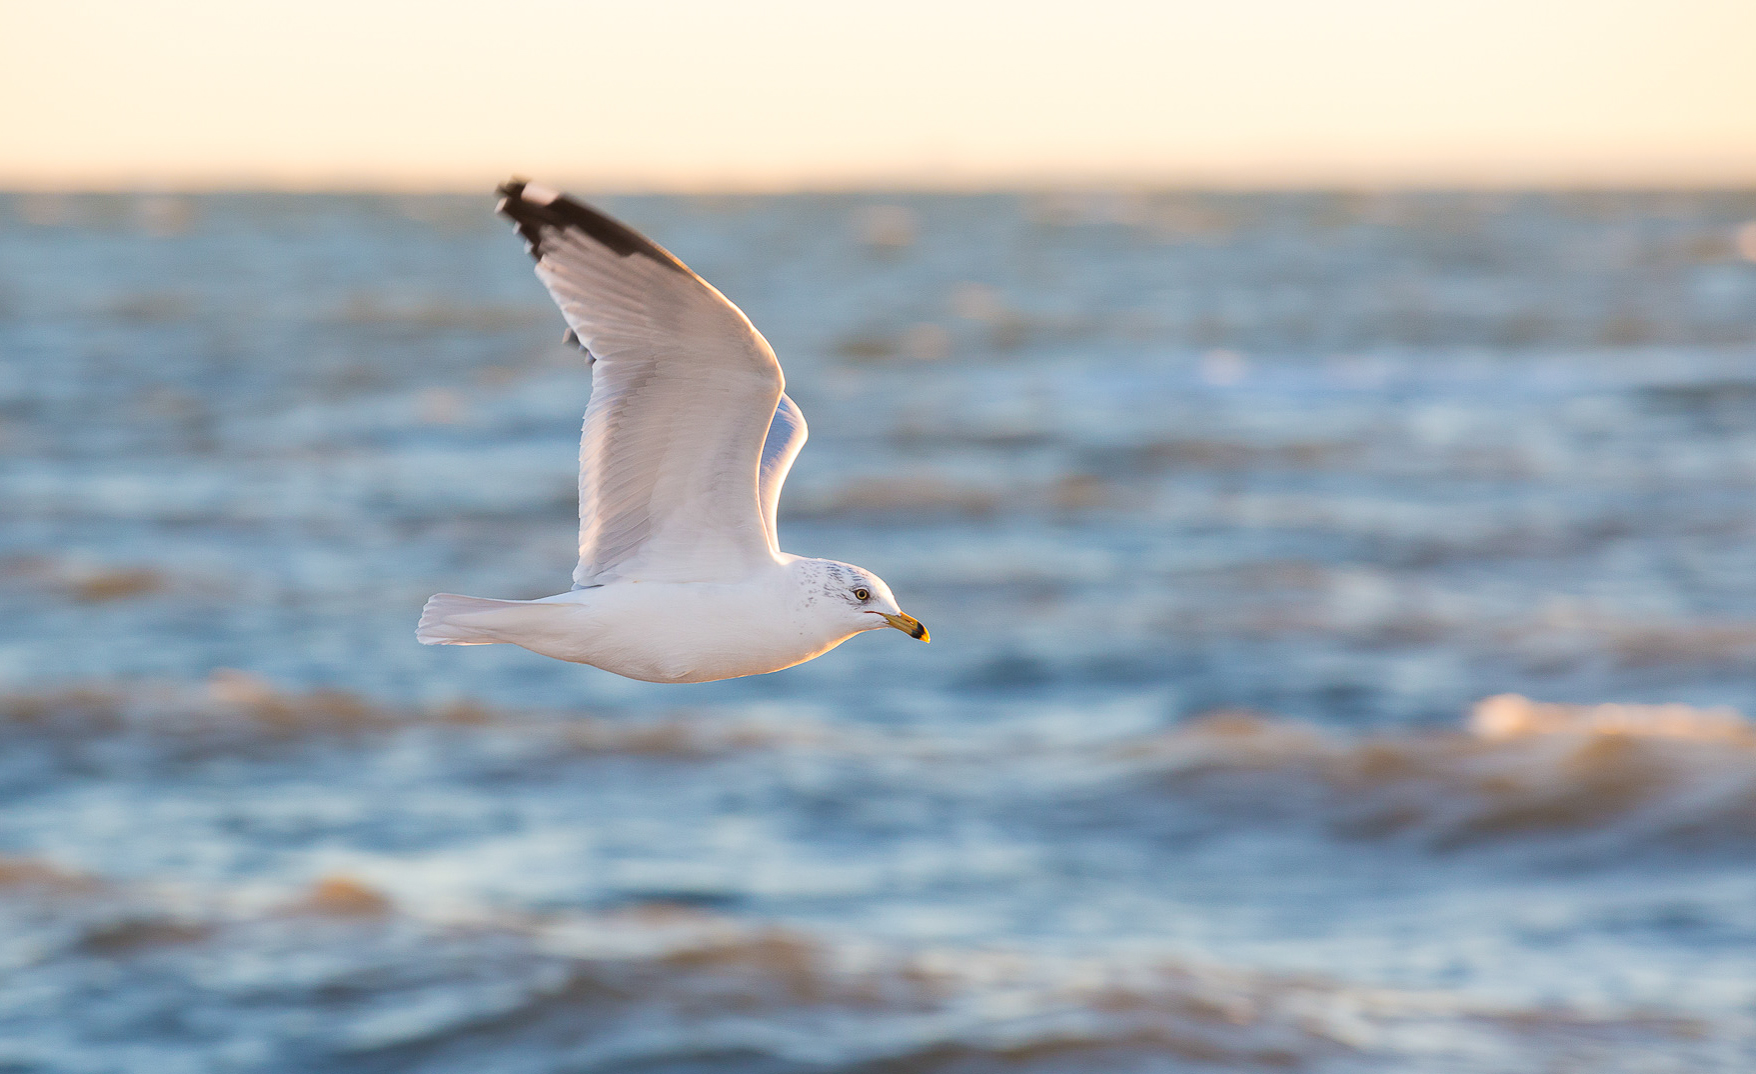 Nancy Moon's Photography of Seagulls in Connecticut